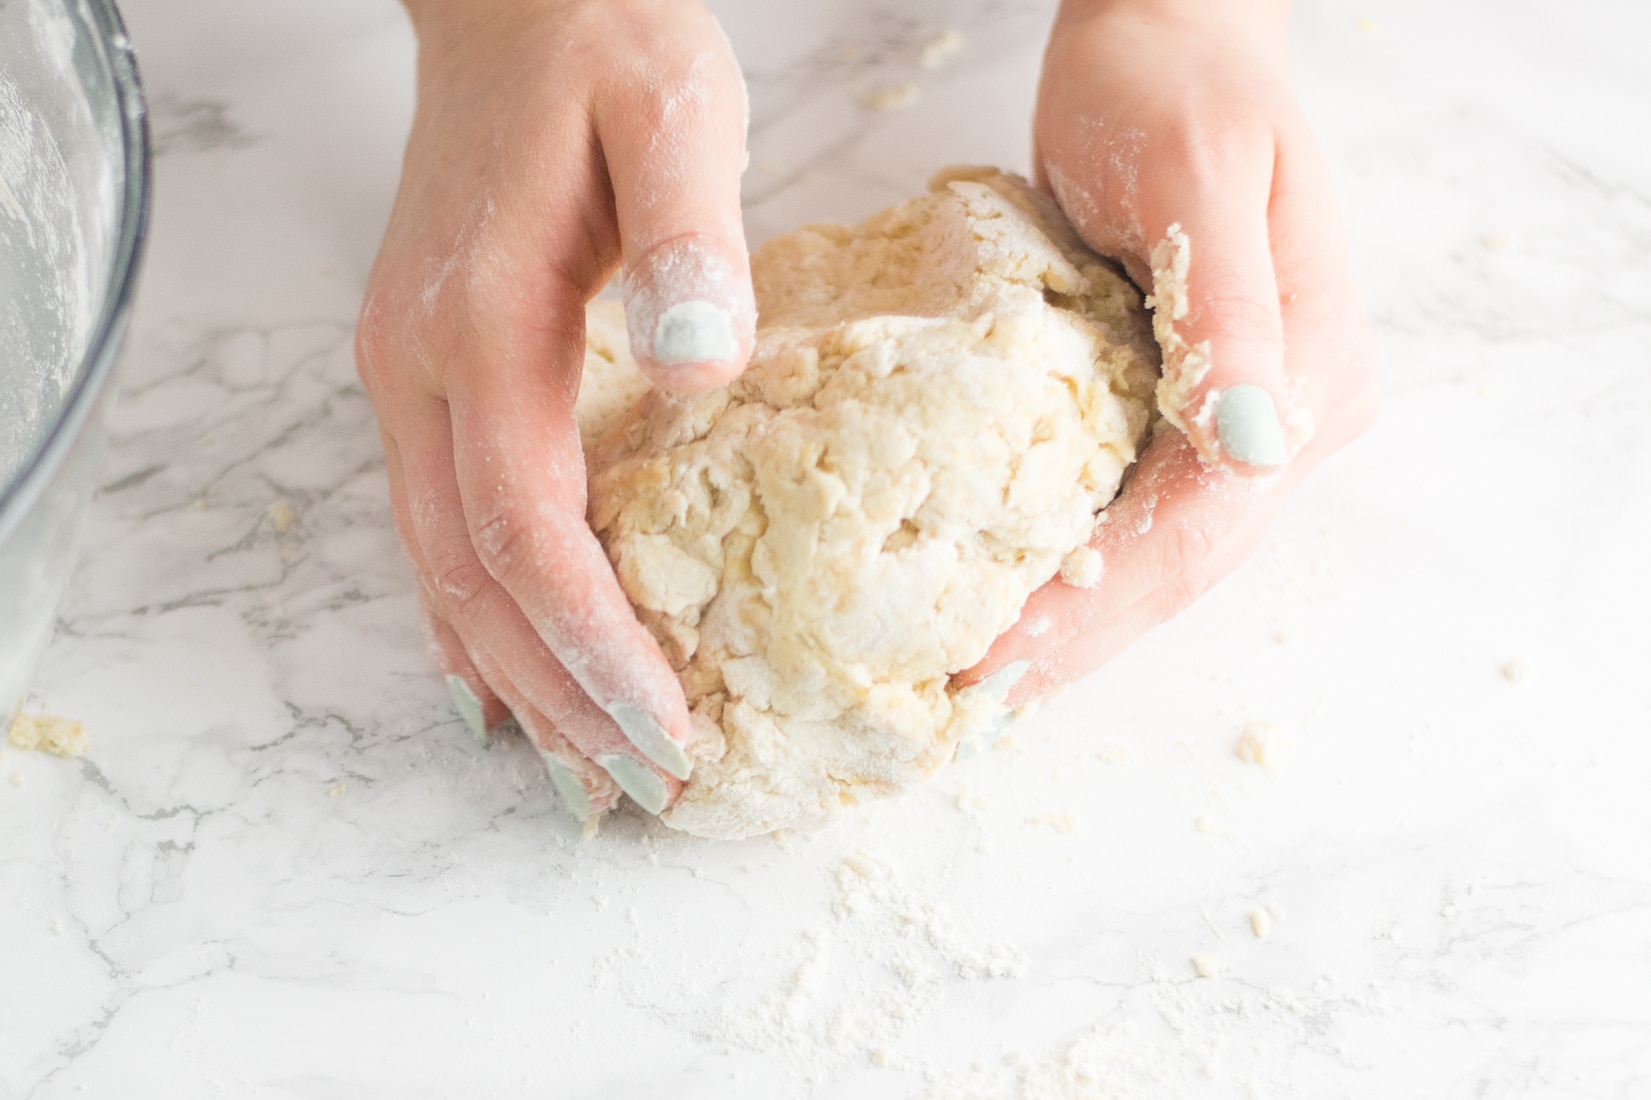 hands kneading dough on marble counter